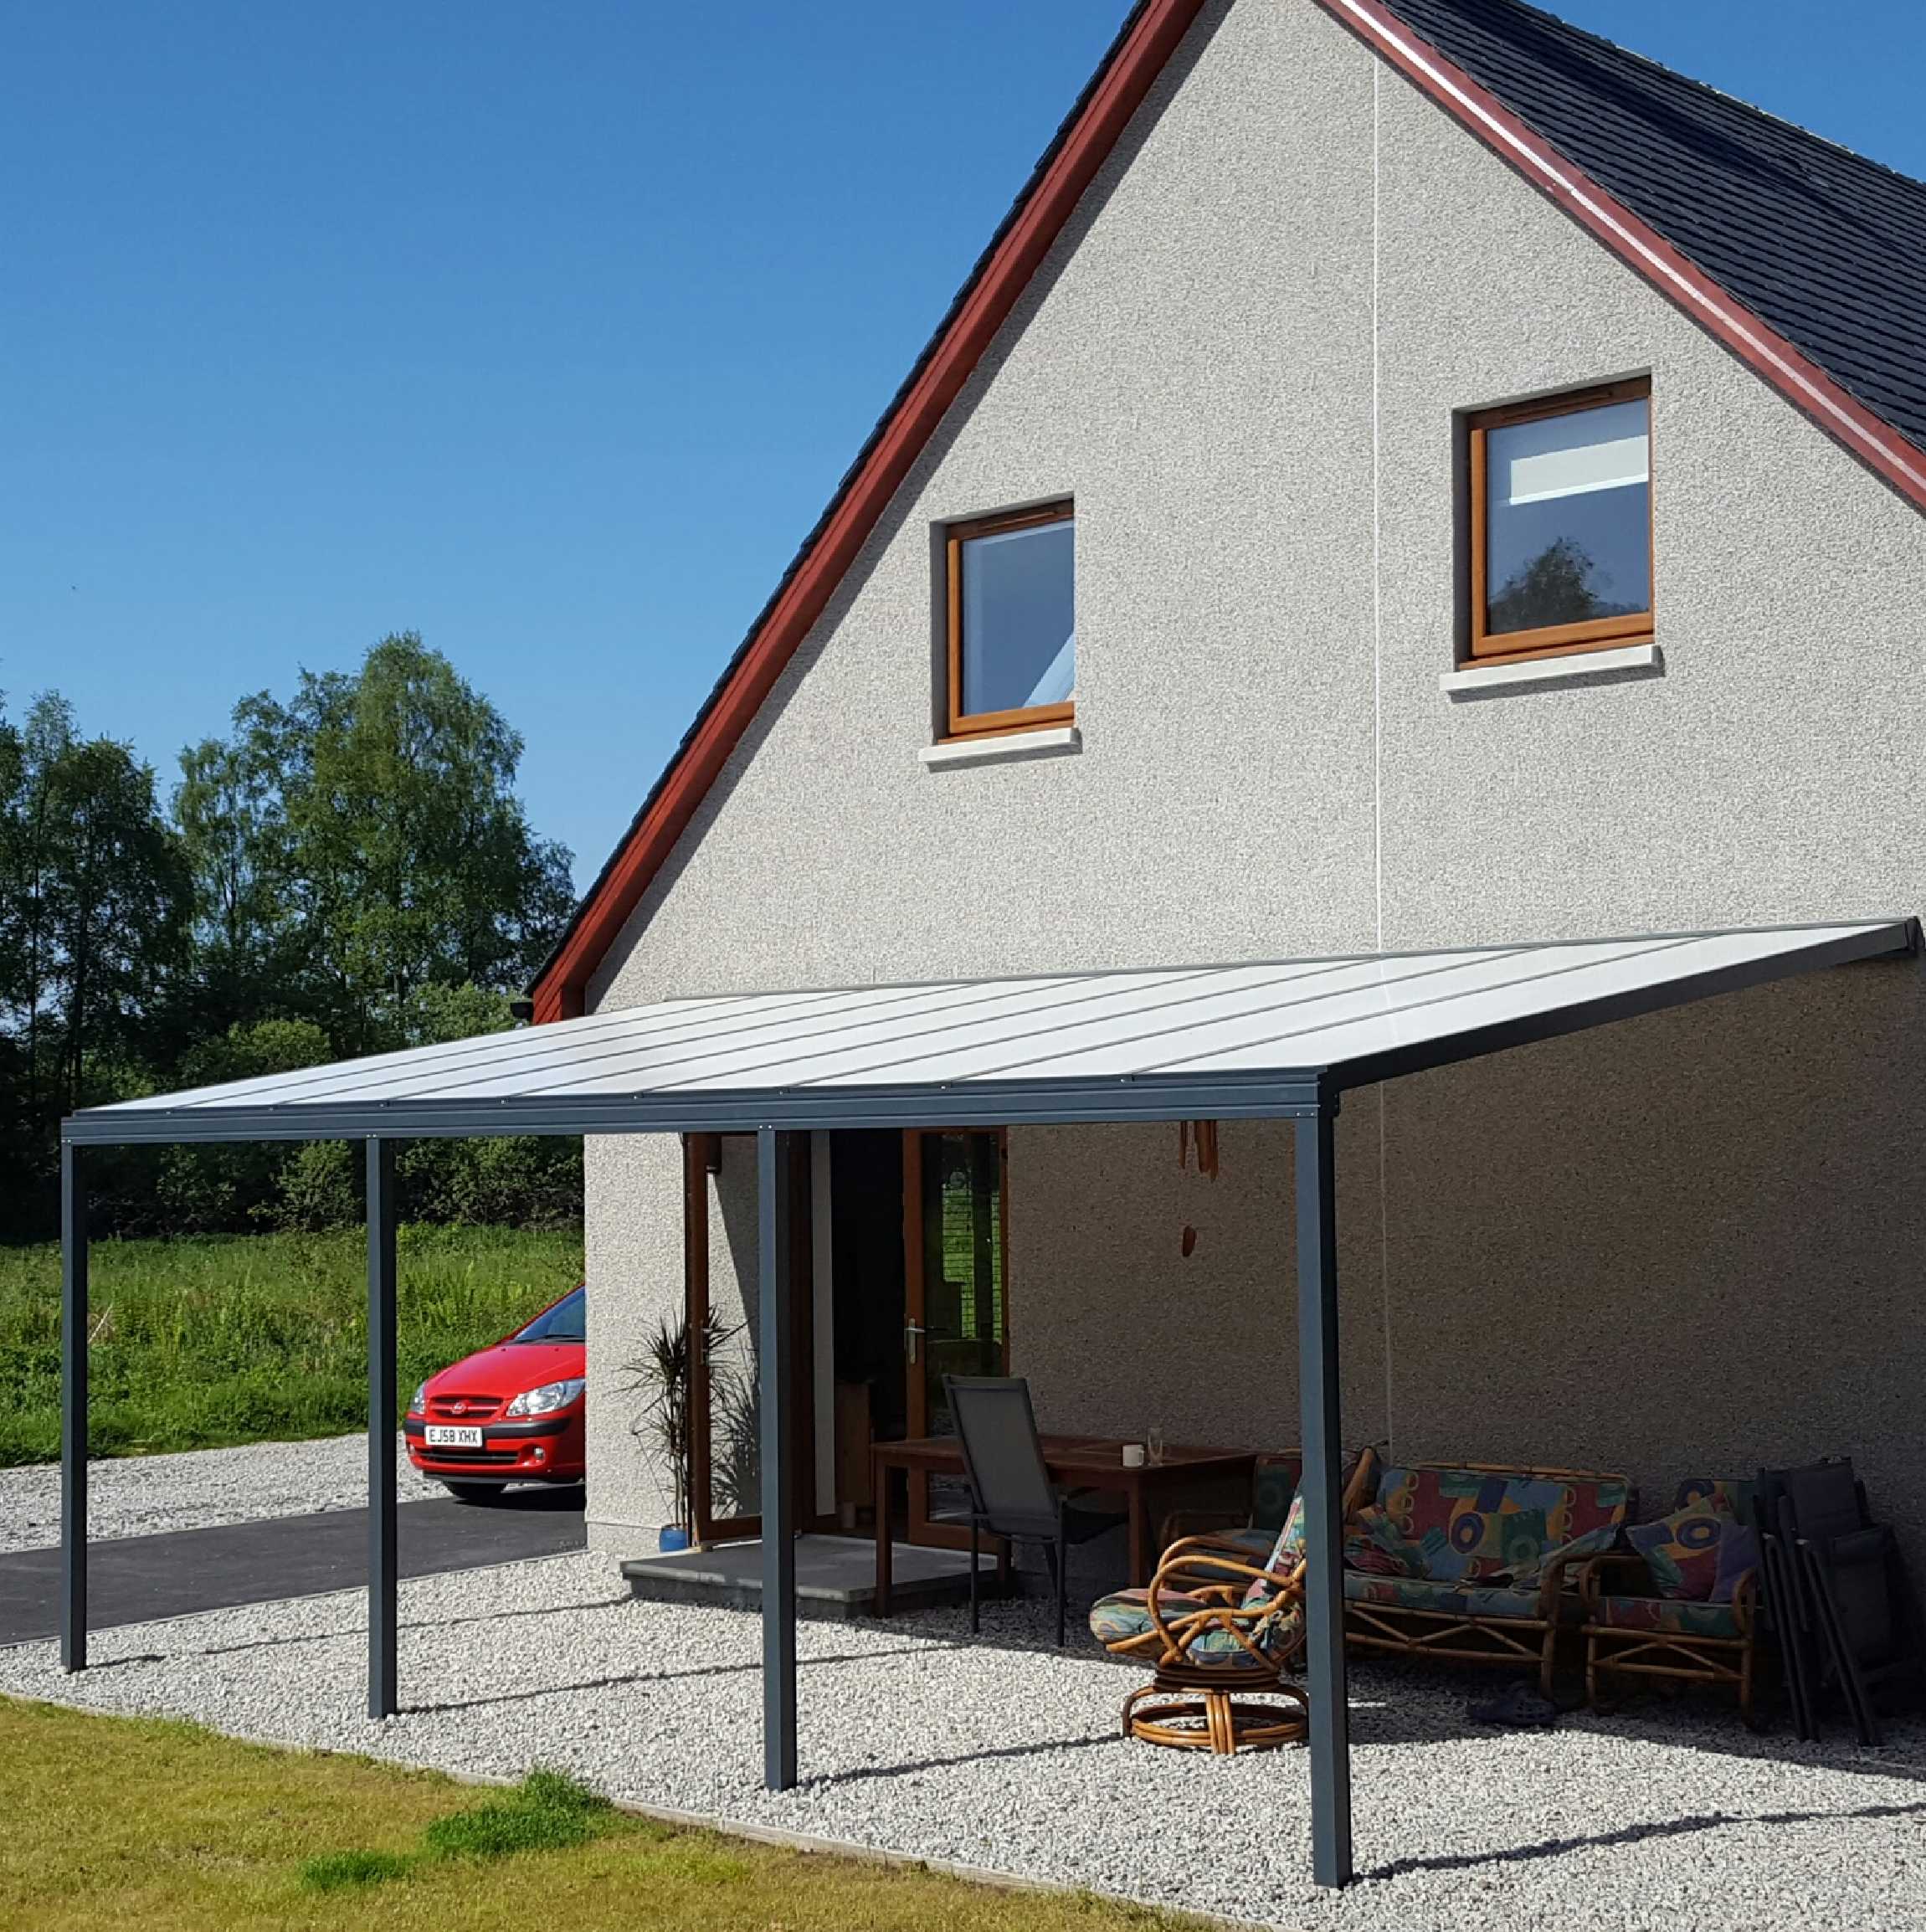 Great selection of Omega SmartLean-To Canopy, Anthracite Grey, 16mm Polycarbonate Glazing - 9.5m (W) x 2.0m (P), (5) Supporting Posts